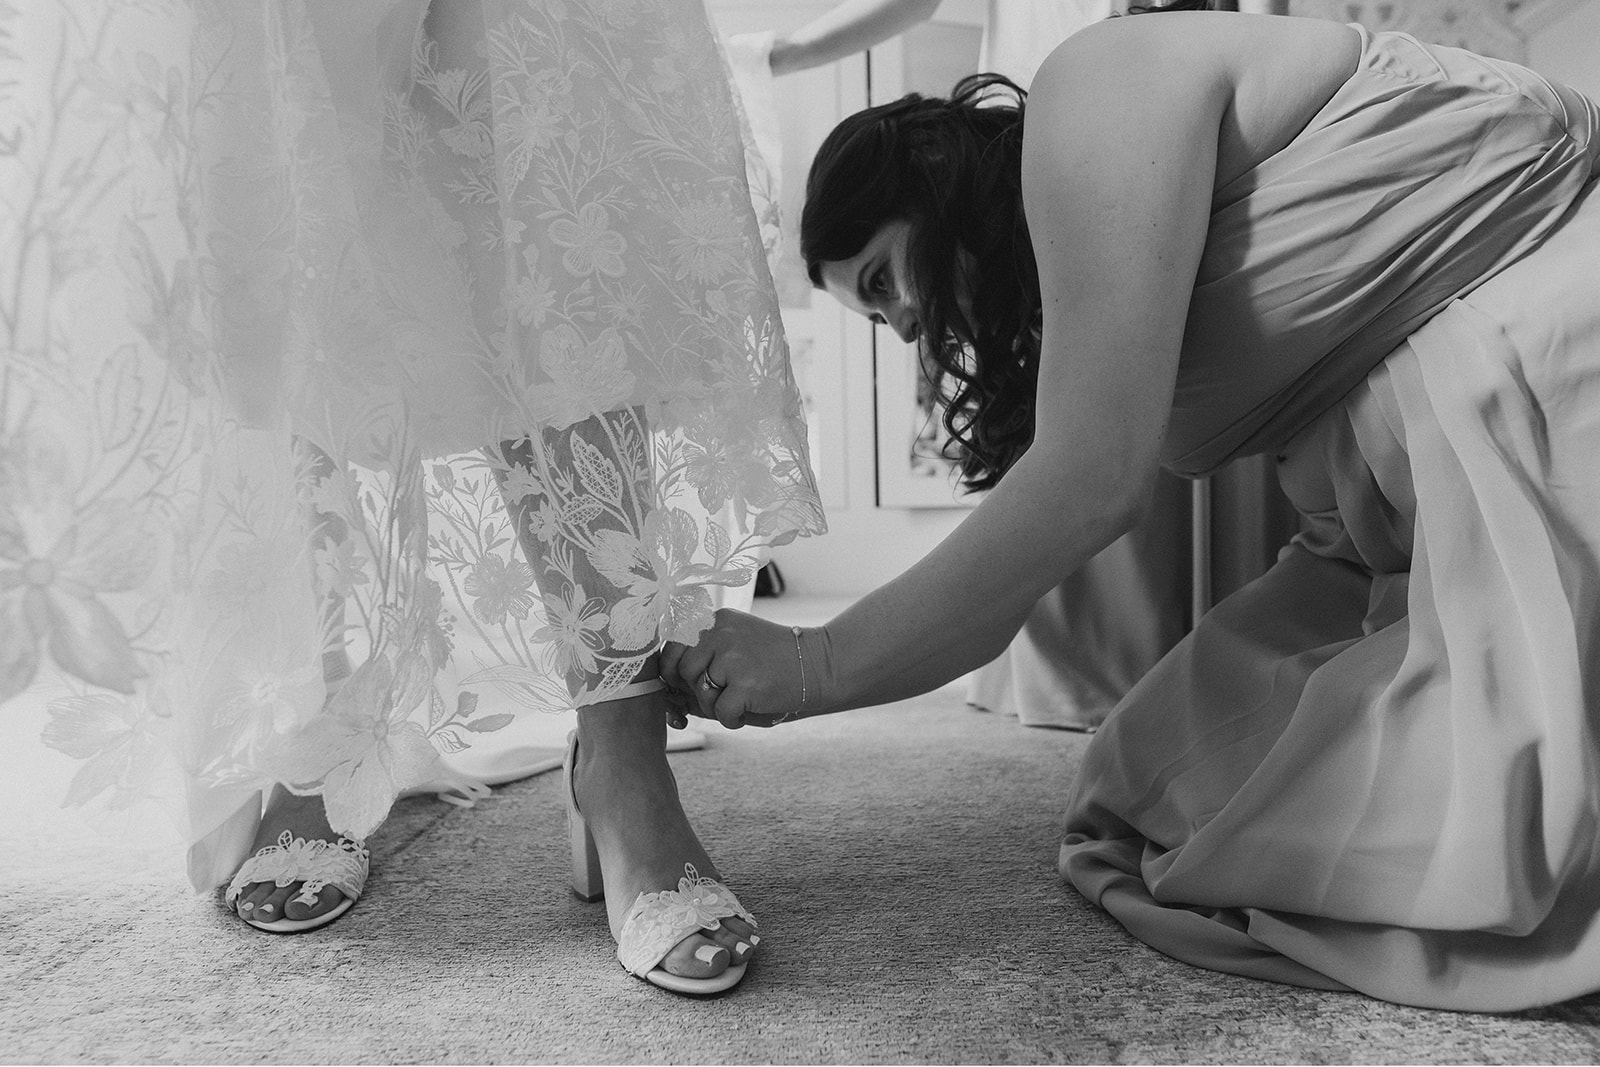 Hodsock Priory Wedding Photography - a bridesmaid helping with the wedding shoes